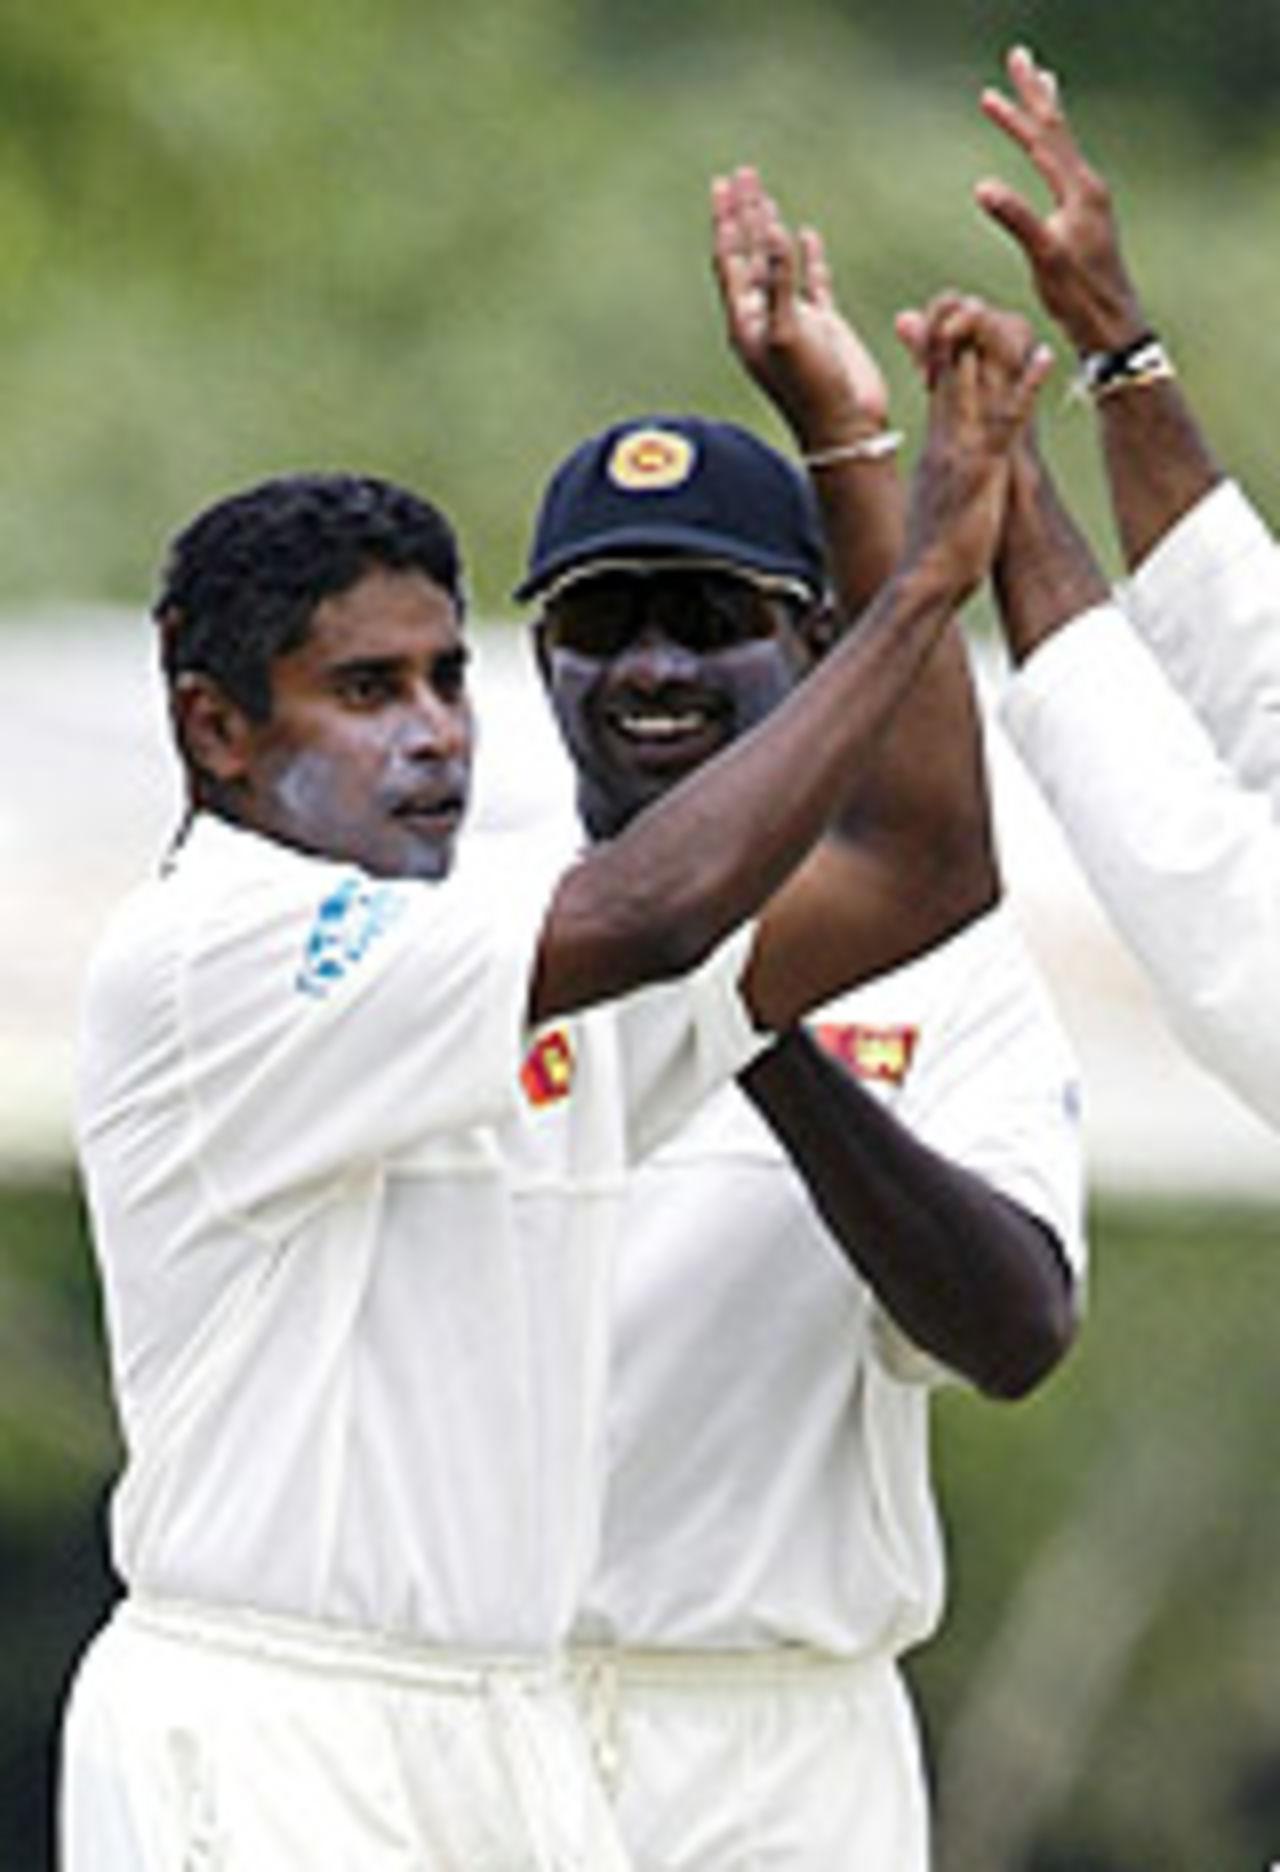 Chaminda Vaas, after he takes another wicket, Sri Lanka v Australia, 2nd Test, Kandy, 2nd day, March 18, 2004